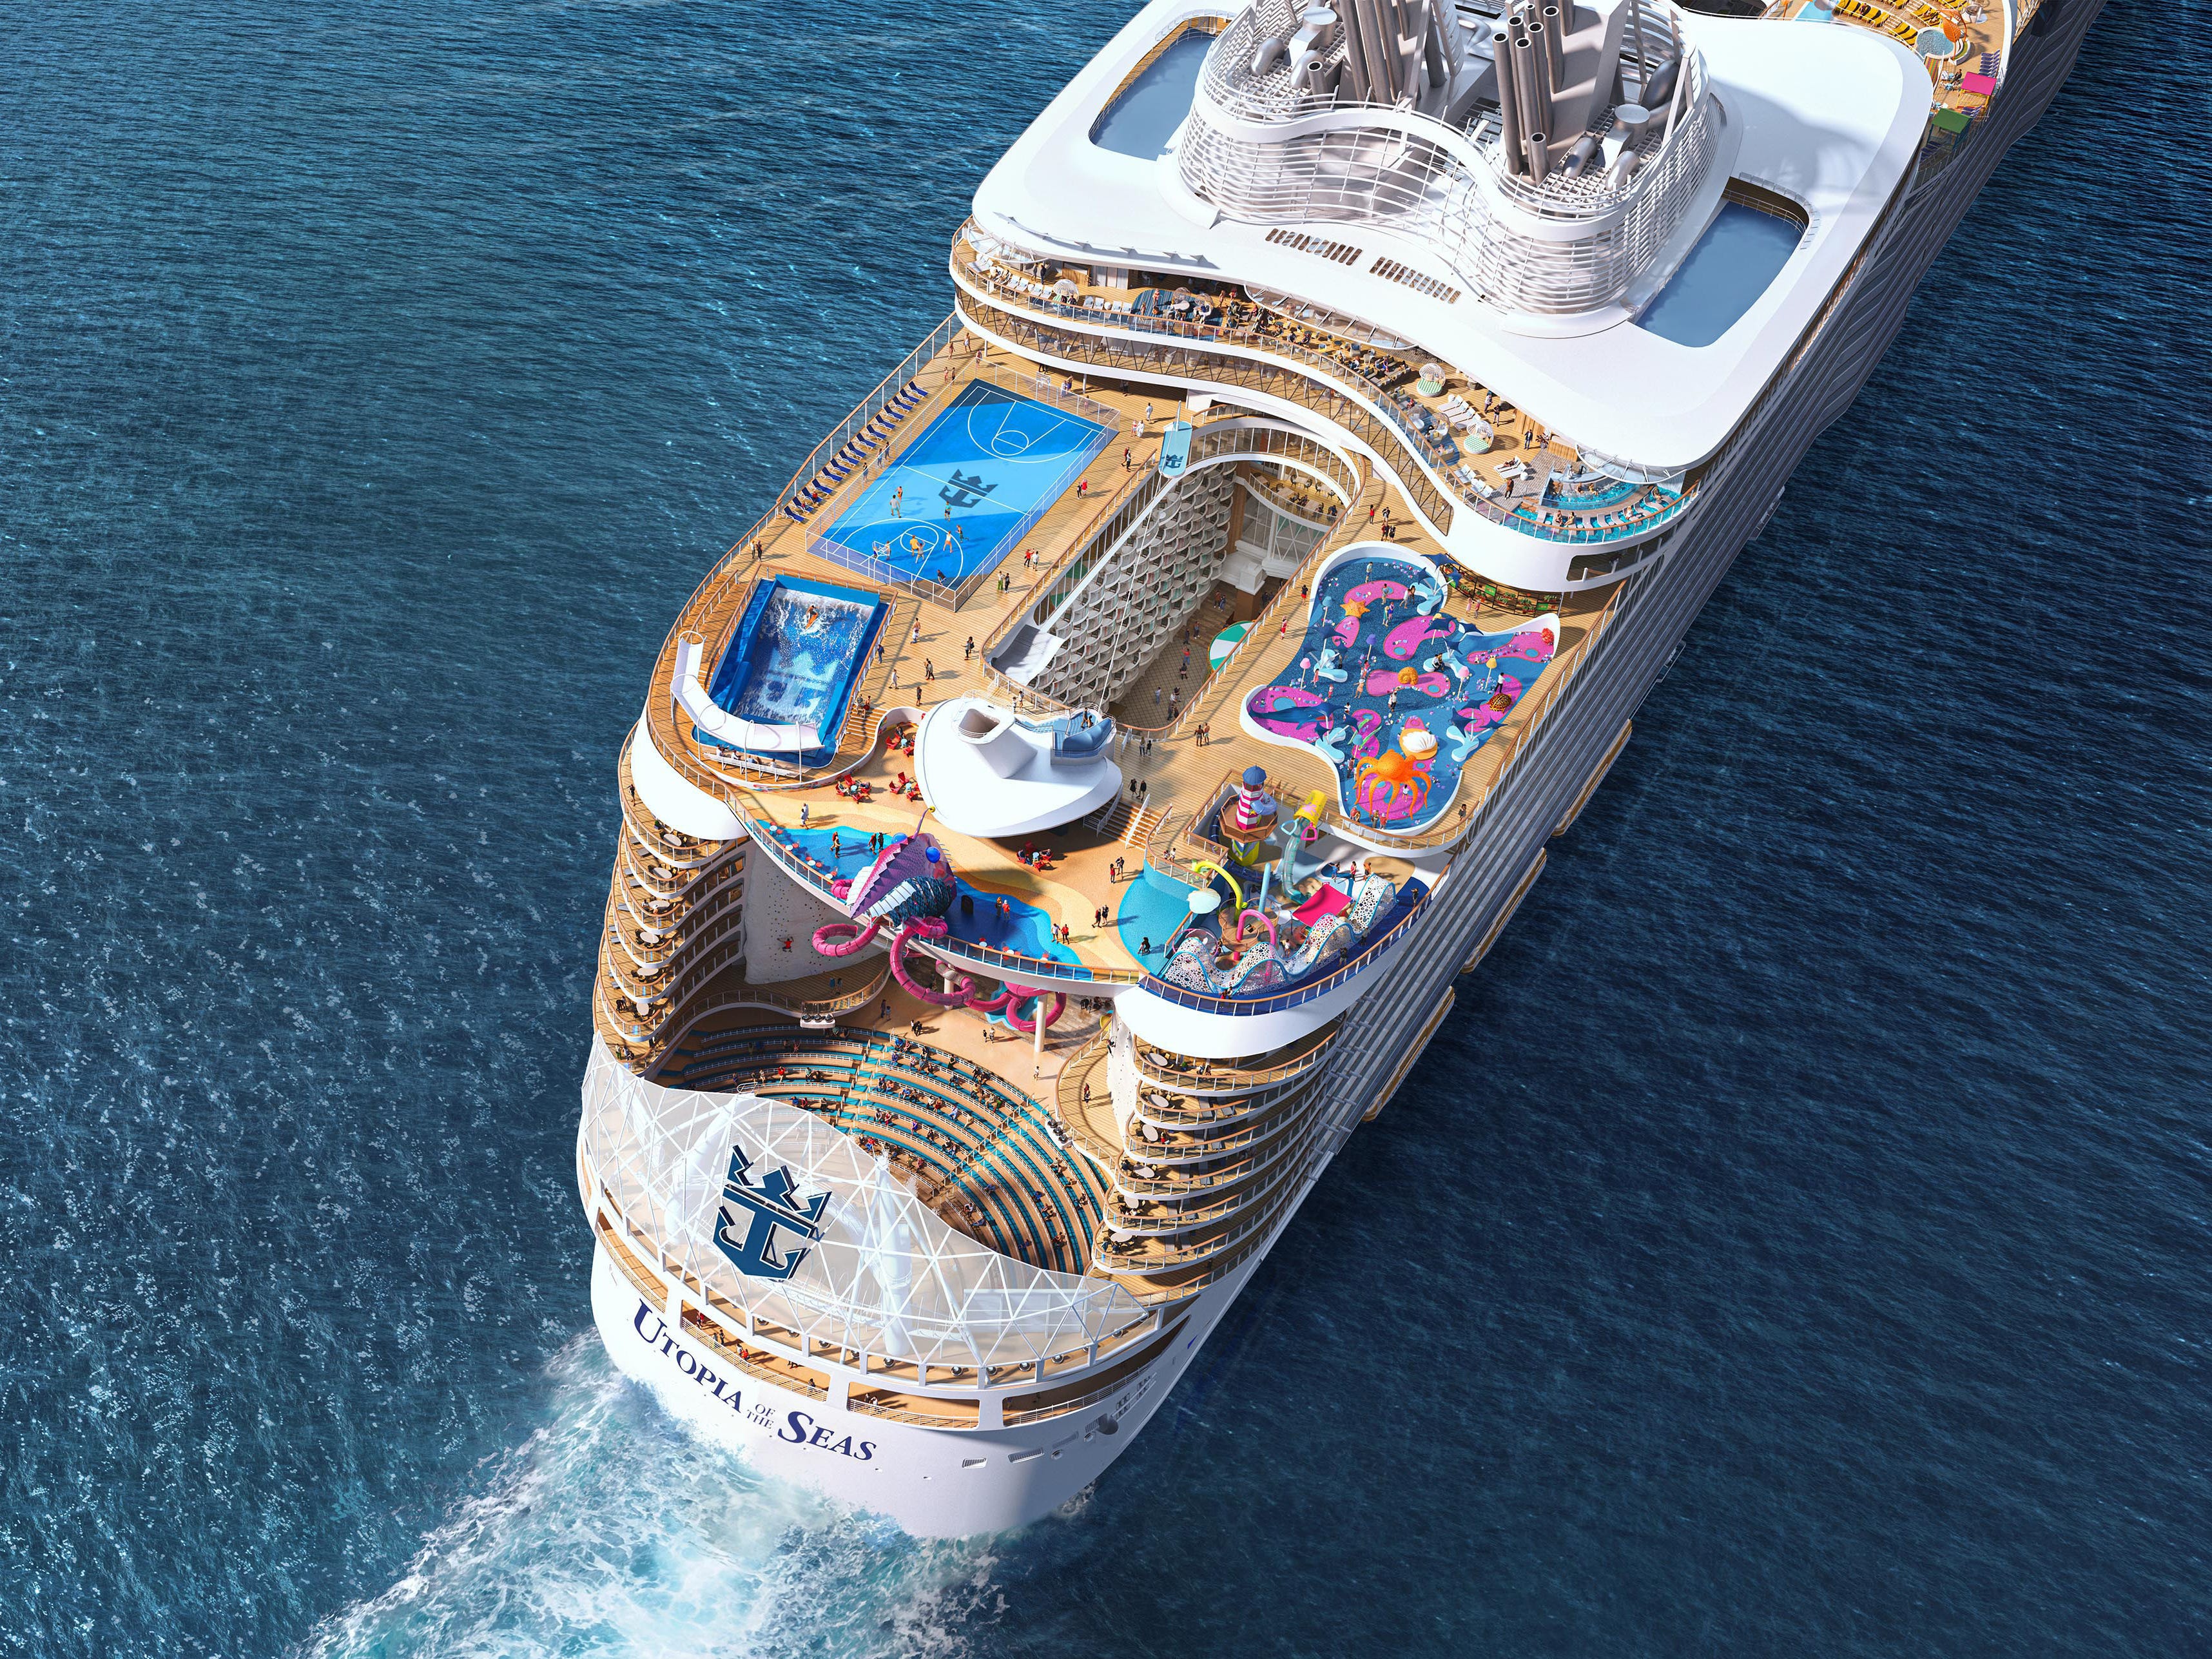 <ul class="summary-list"><li>Royal Caribbean is preparing for the July debut of its next mega-ship, Utopia of the Seas.</li><li>Utopia will enter service six months after the debut of its wildly popular predecessor,<a href="https://www.businessinsider.com/royal-caribbean-icon-of-the-seas-cruise-ship-review-photos-2024-2"> Icon of the Seas</a>.</li><li>Take a look at Royal Caribbean's plans for the upcoming 7,958-person mega-ship.</li></ul><p>Royal Caribbean has been basking in the wild booking frenzy of its newest ship: <a href="https://www.businessinsider.com/royal-caribbean-icon-of-the-seas-cruise-ship-photo-tour-2024-1">the Icon of the Seas</a>, officially the world's largest cruise ship. </p><p>But behind the scenes, the cruise line is already prepping to debut its next giant vessel: 1,188-foot-long Utopia of the Seas.</p><p>In July — only six months after <a href="https://www.businessinsider.com/icon-of-the-seas-joins-royal-caribbean-fleet-2023-11">Icon's debut</a> — the upcoming mega-ship will join its fleet with a series of three- to four-night cruises from Florida's Port Canaveral, Royal Caribbean says. </p><p>And it's sure to add more traffic to what's already one of the world's busiest cruising hubs: Royal Caribbean says Utopia will accommodate up to 7,958 people, including 5,668 guests.</p><div class="read-original">Read the original article on <a href="https://www.businessinsider.com/new-royal-caribbean-giant-cruise-ship-utopia-of-seas-photos-2024-2">Business Insider</a></div>